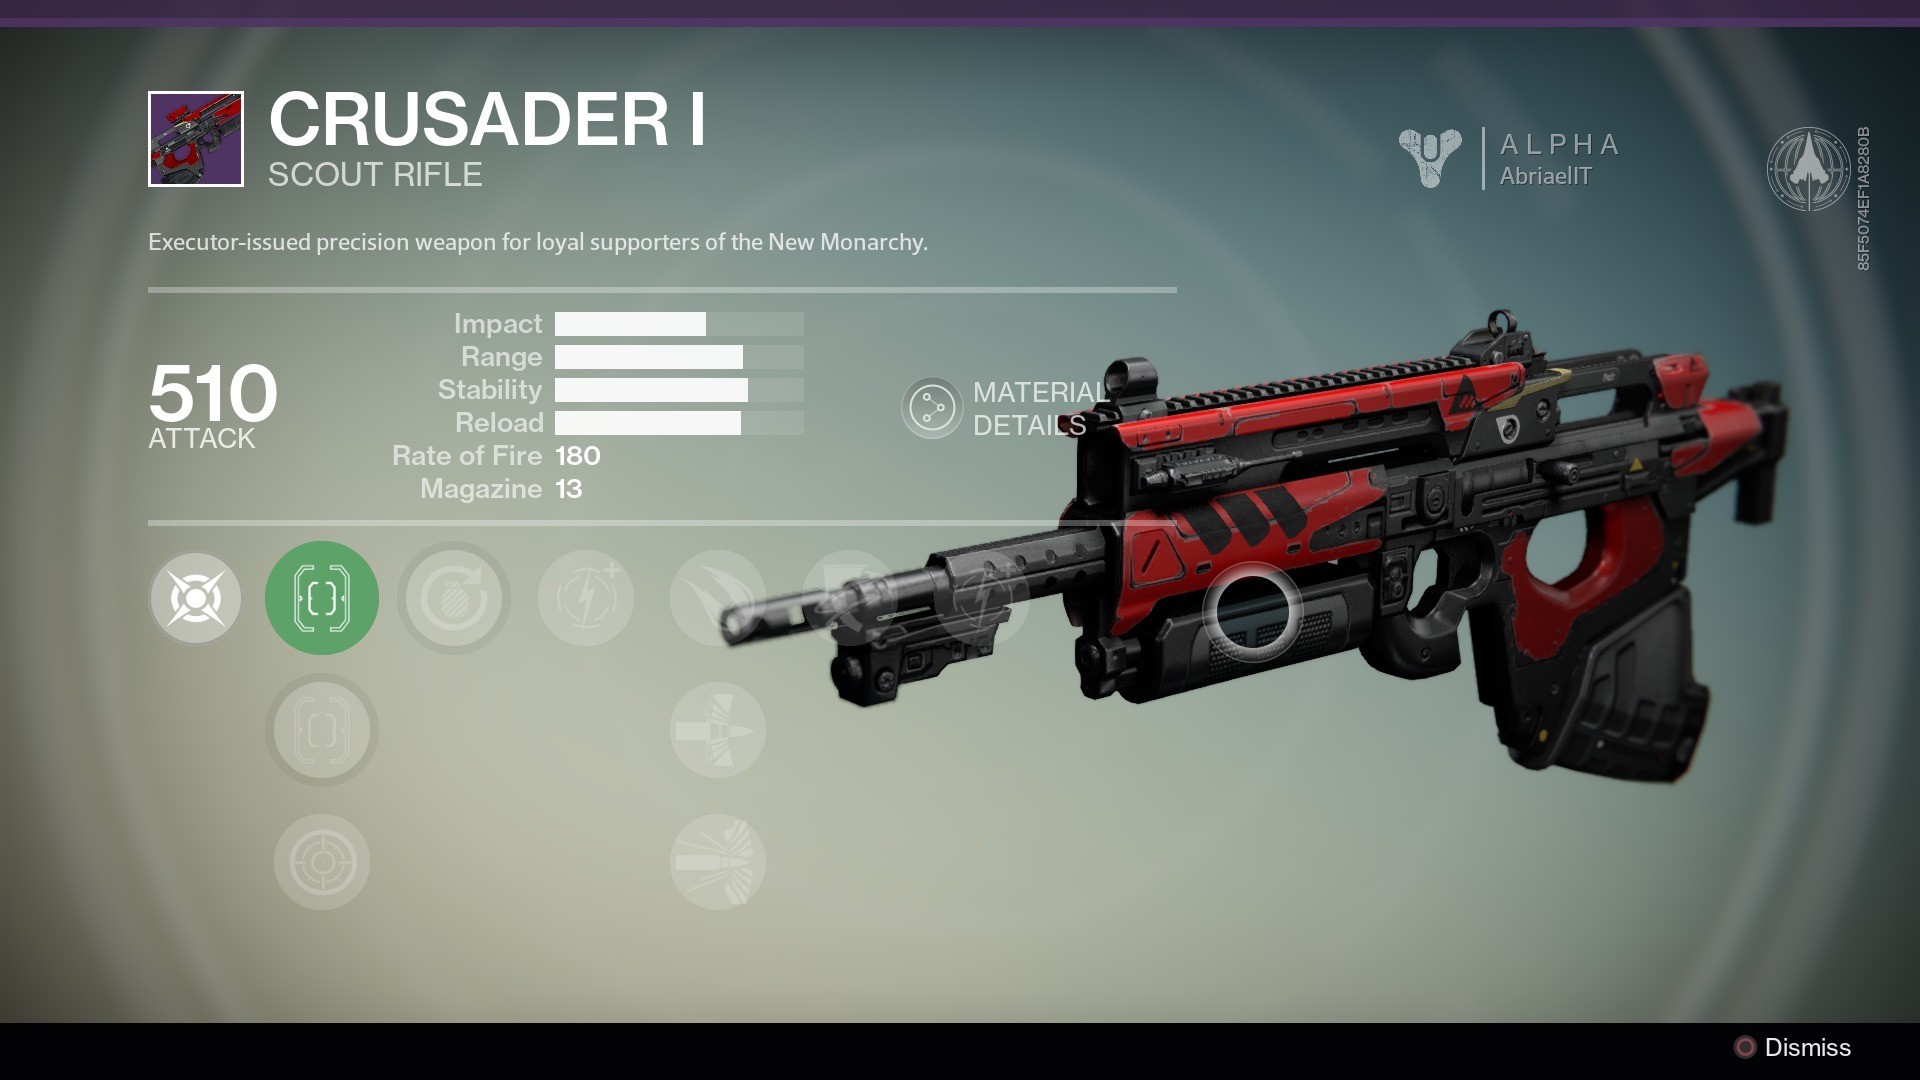 1920x1080 Executor-issued precision weapon for loyal supporters of the New Monarchy.  The Crusader I